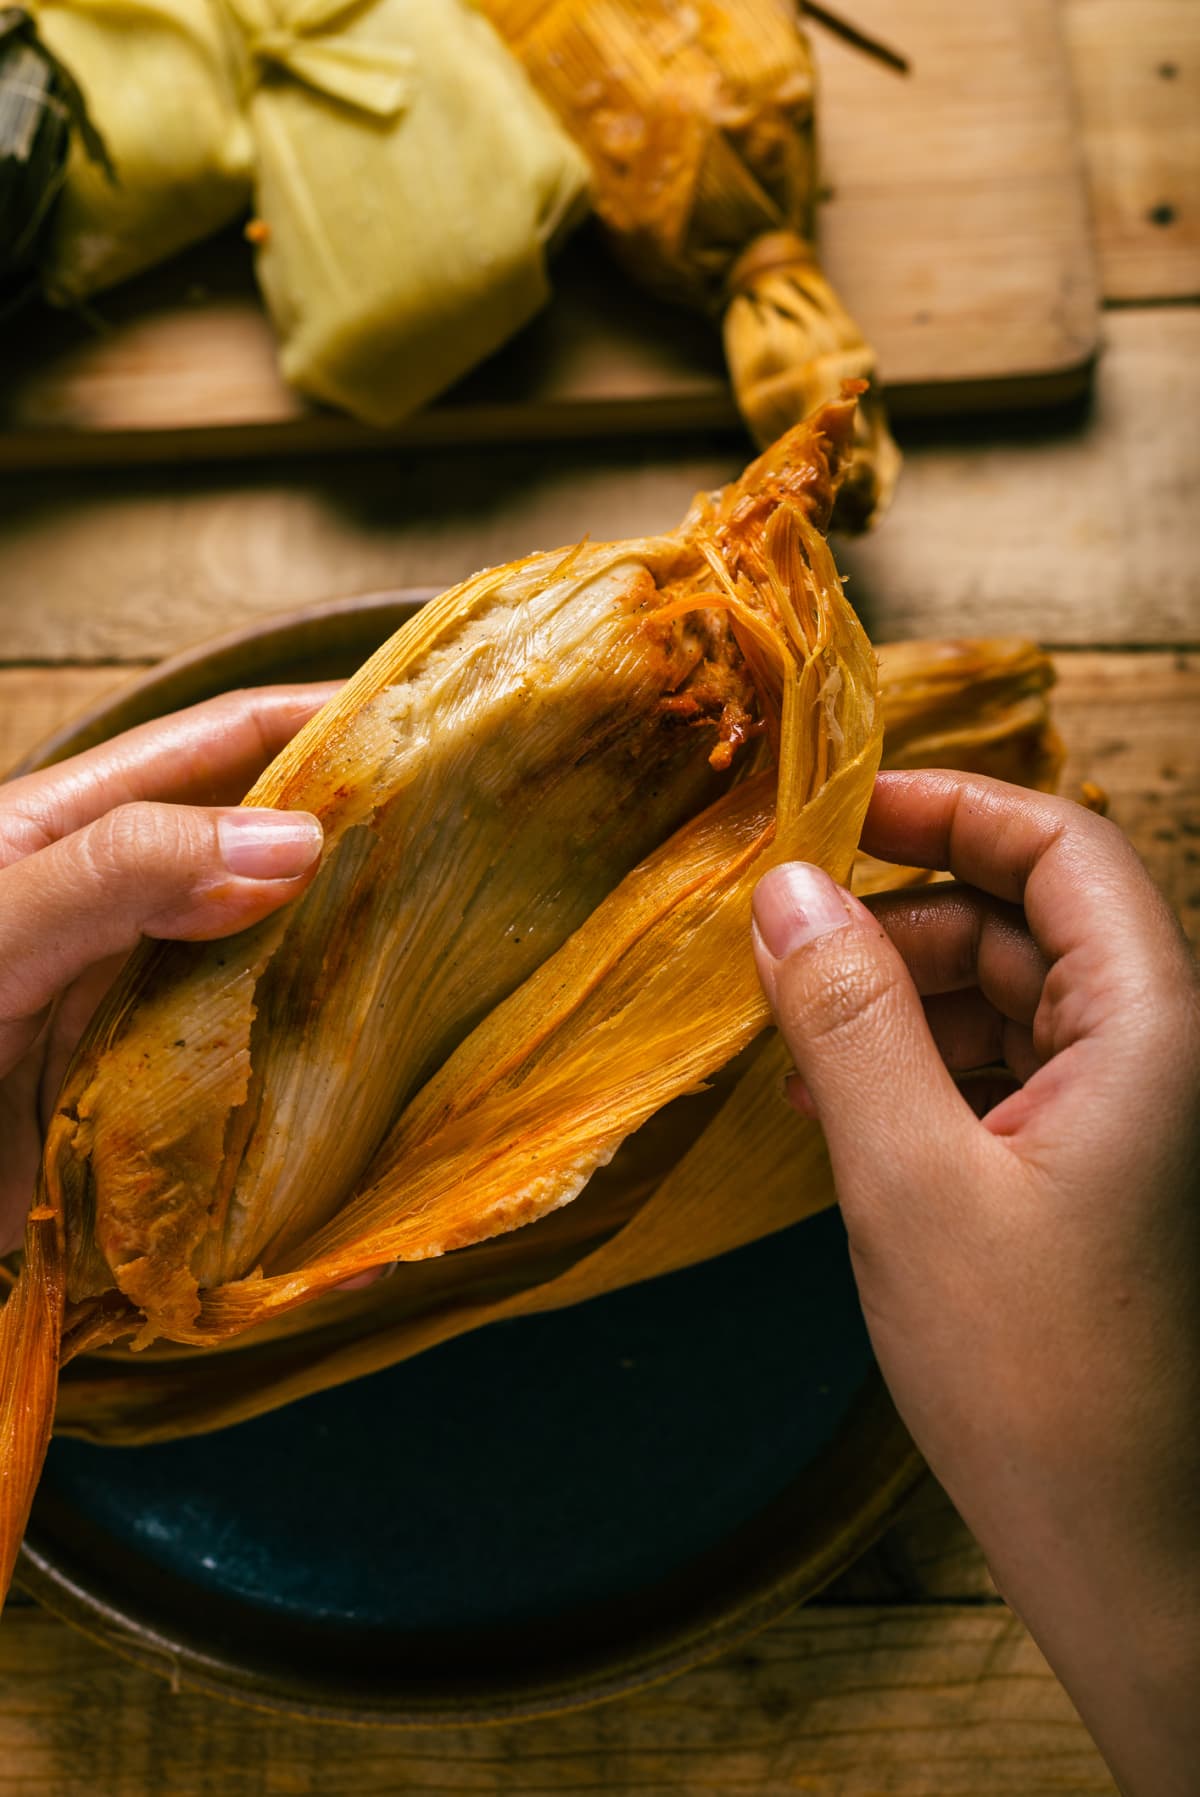 A person unwrapping a tamale